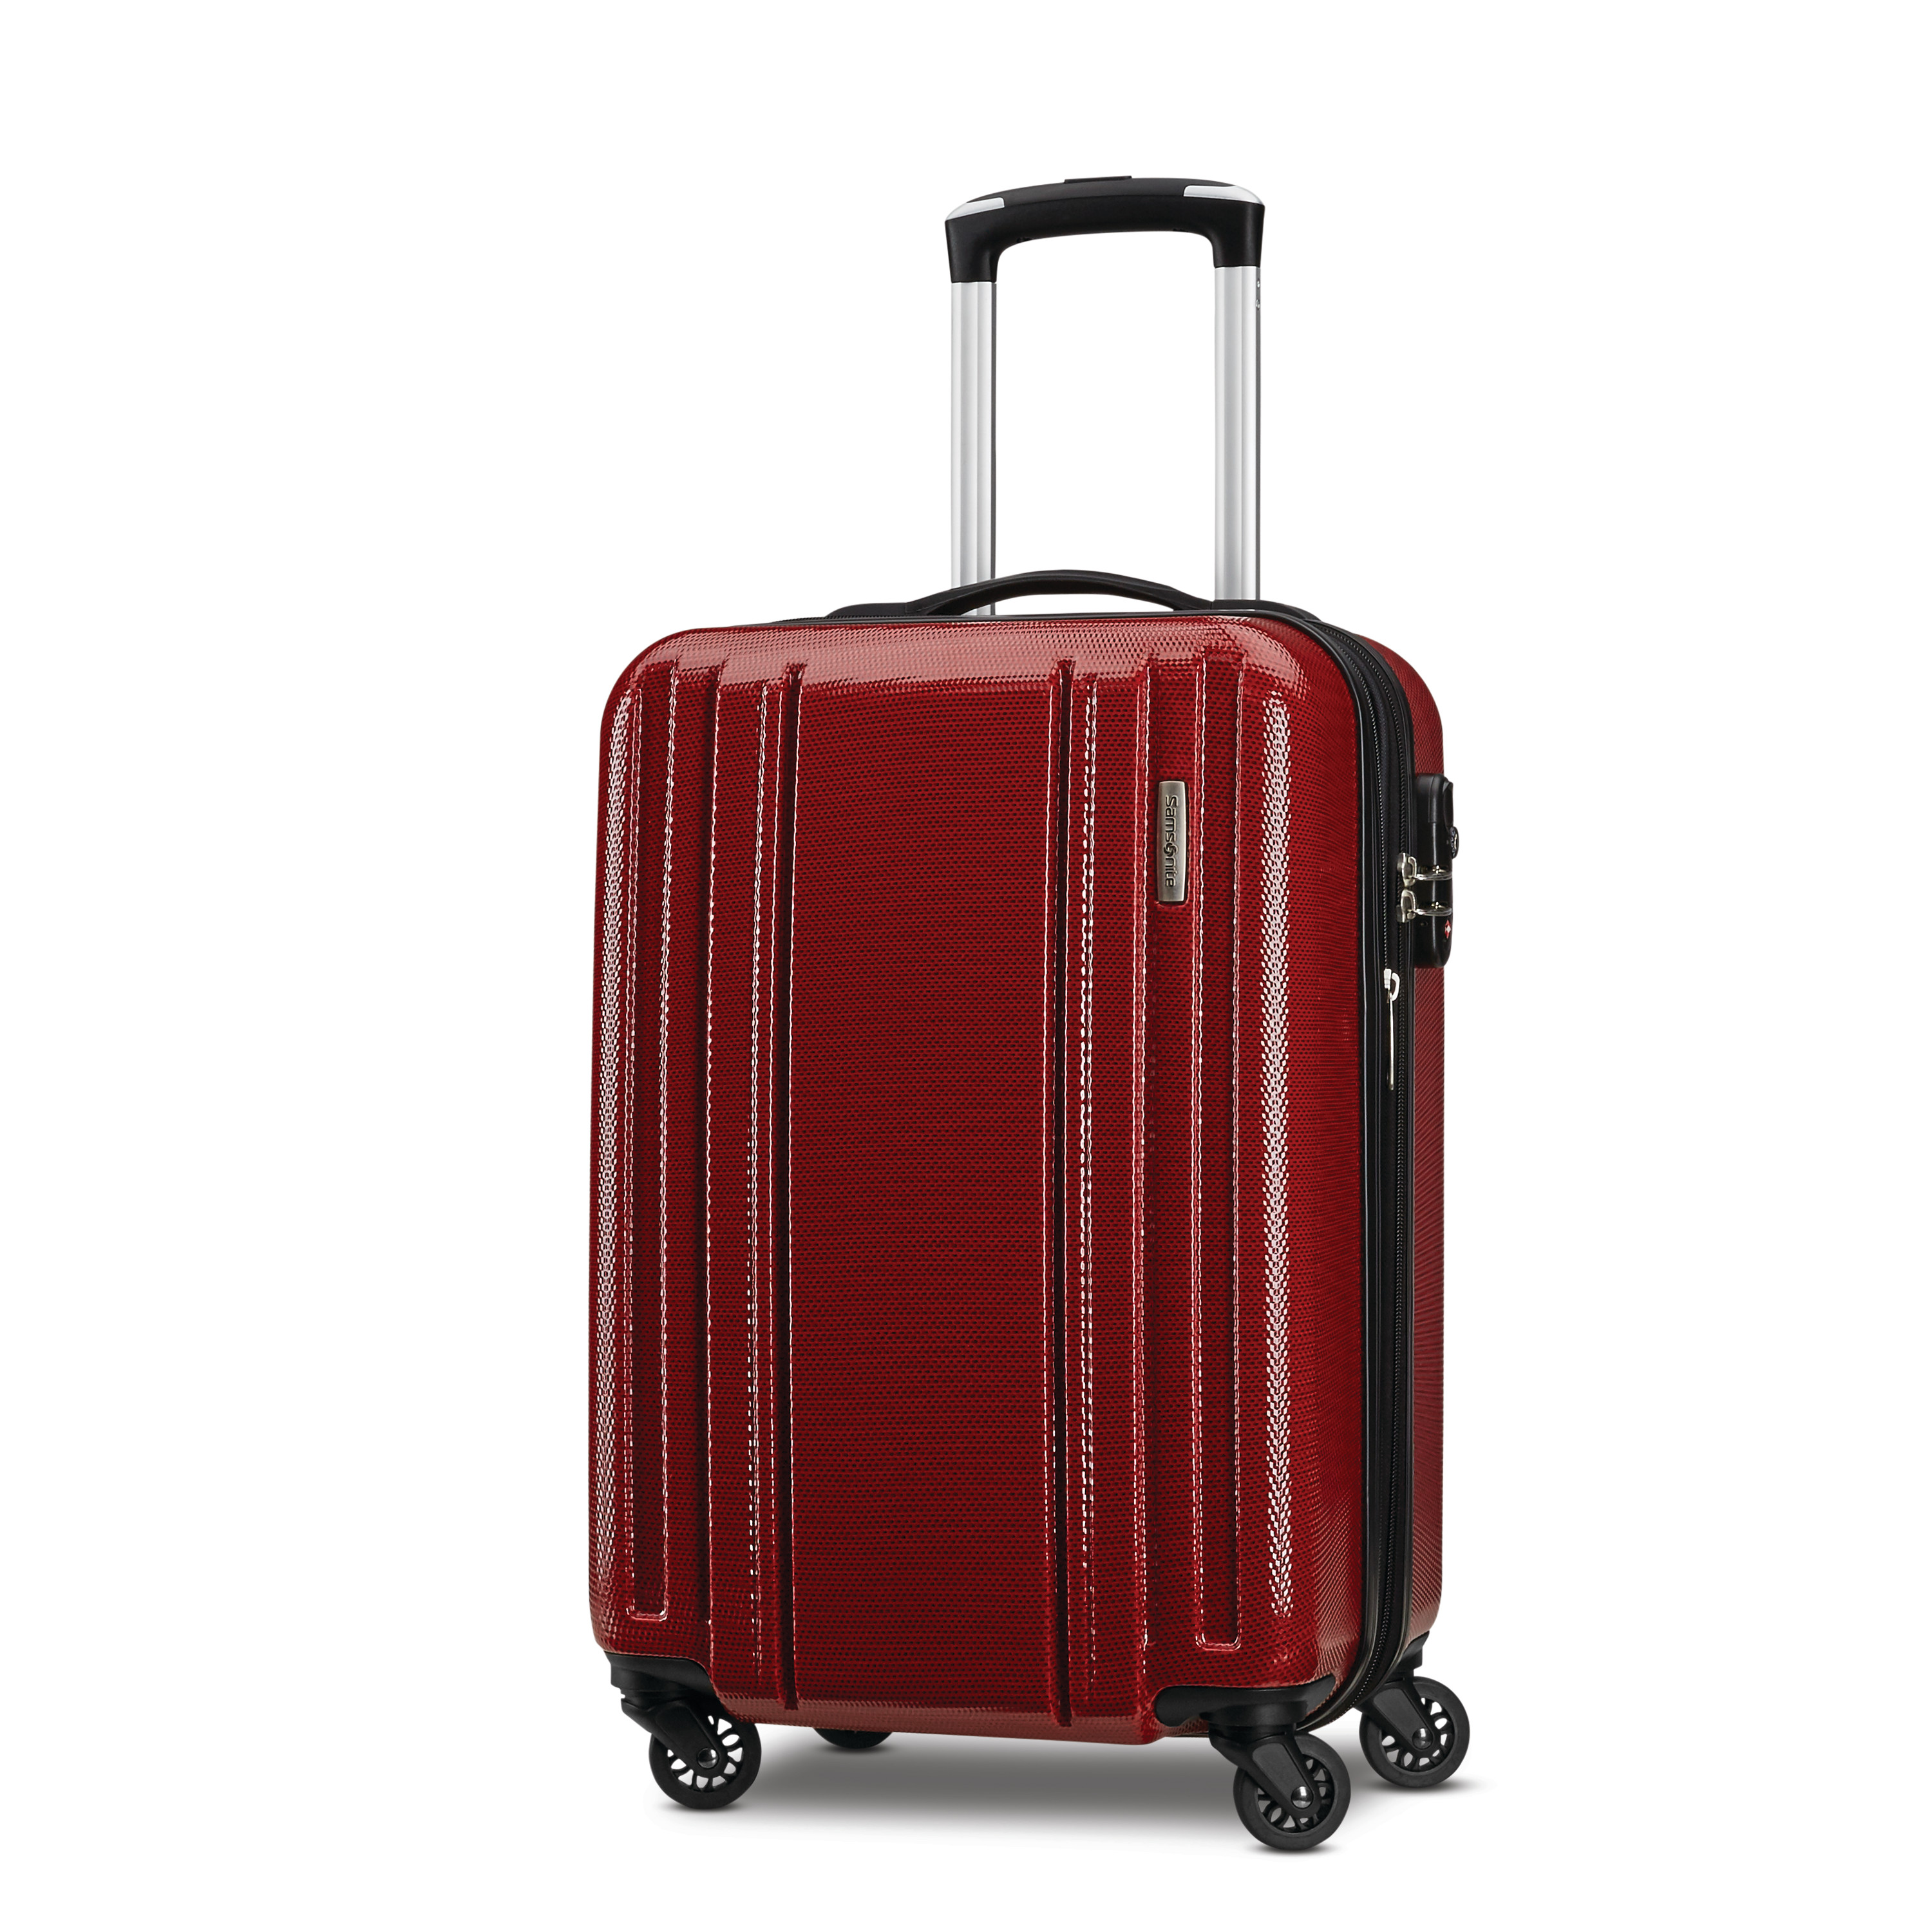 Samsonite Carbon 2 Carry-On Spinner - Luggage